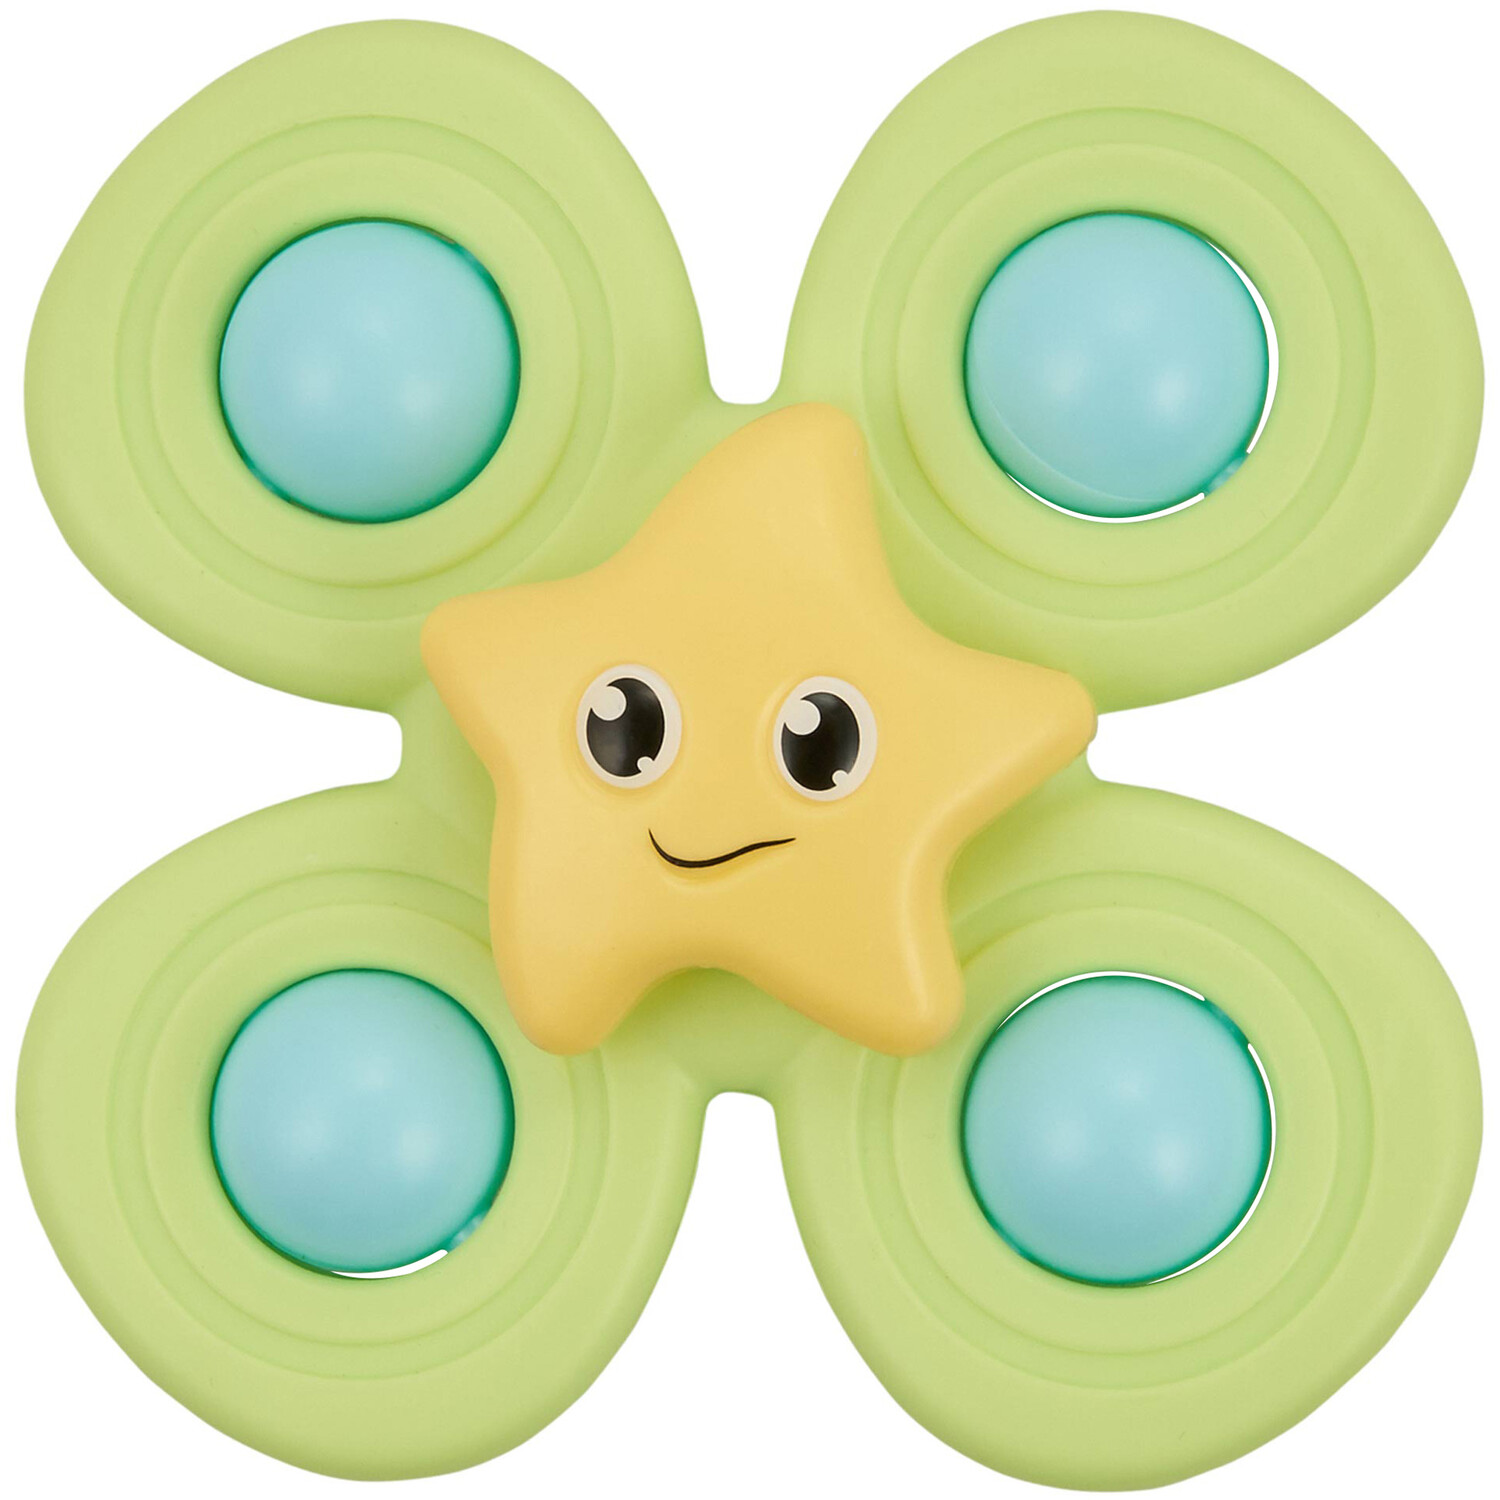 ToyMania Suction Spinners Bath Toy 3 Pack Image 3